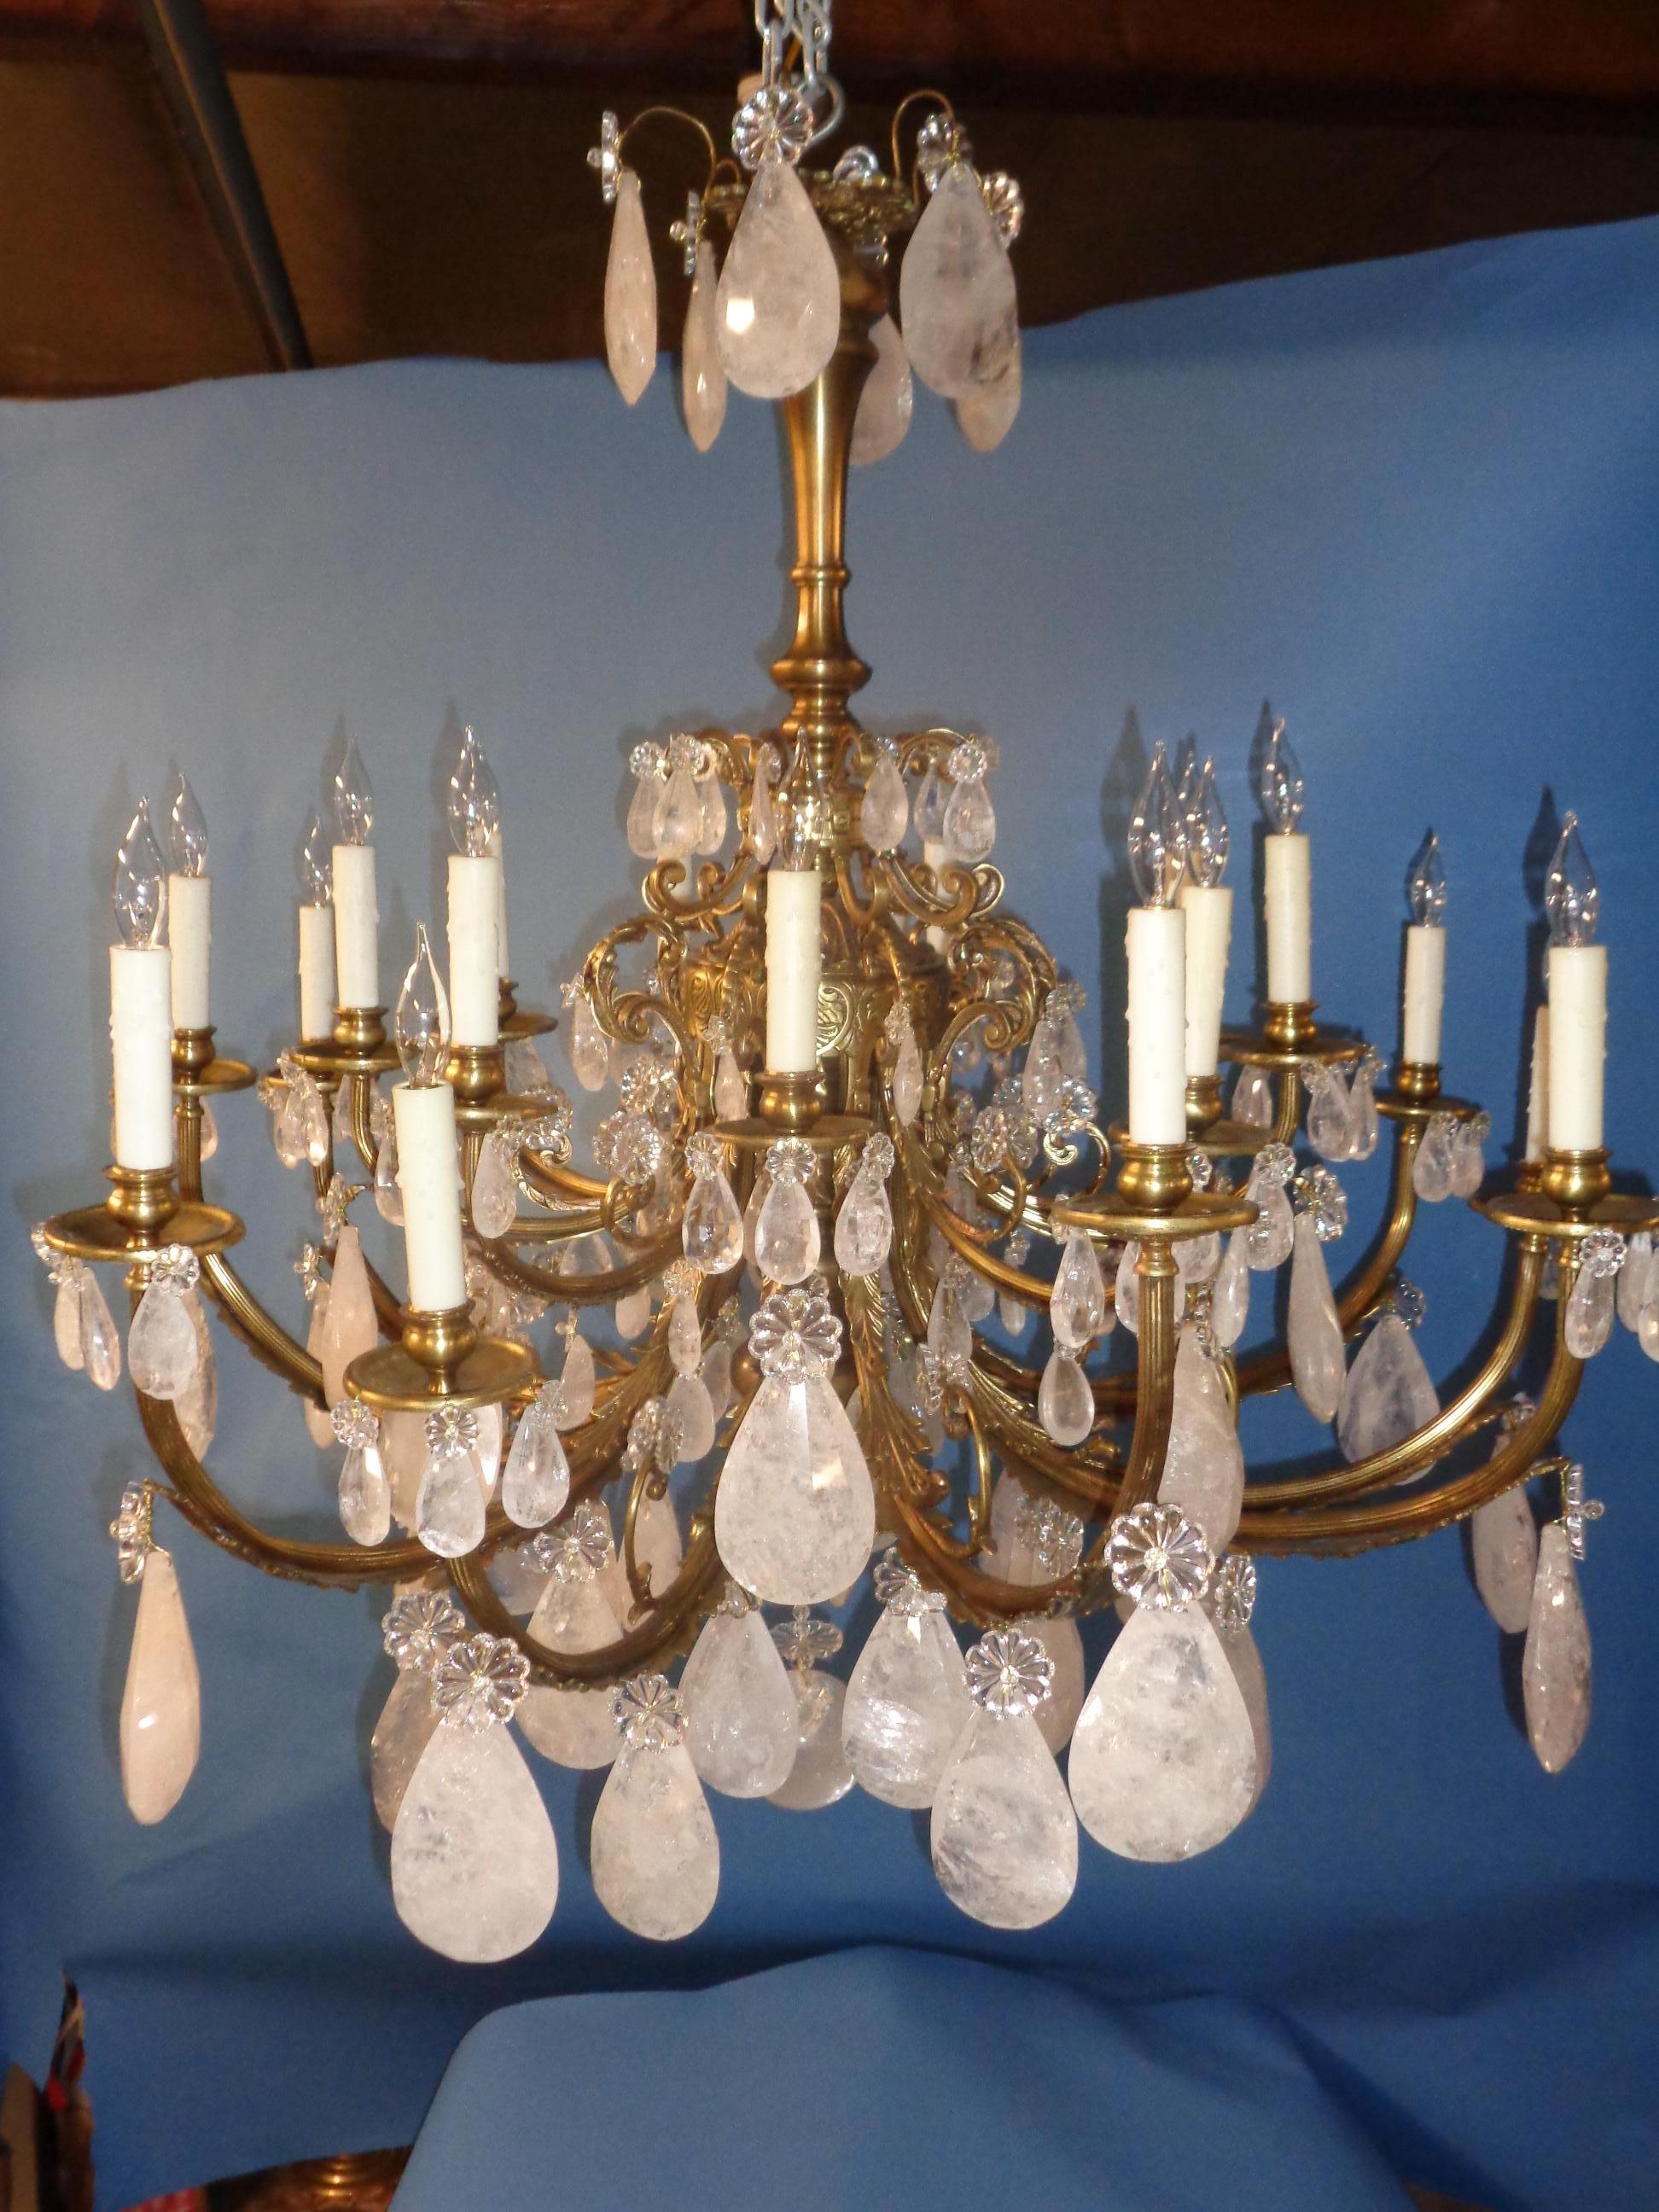 French Louis XV style rock crystal chandelier. The frame is patinated silver over bronze. The crystals are faceted tear drop shaped. There are eighteen candlelights around the perimeter. It has been newly electrified.